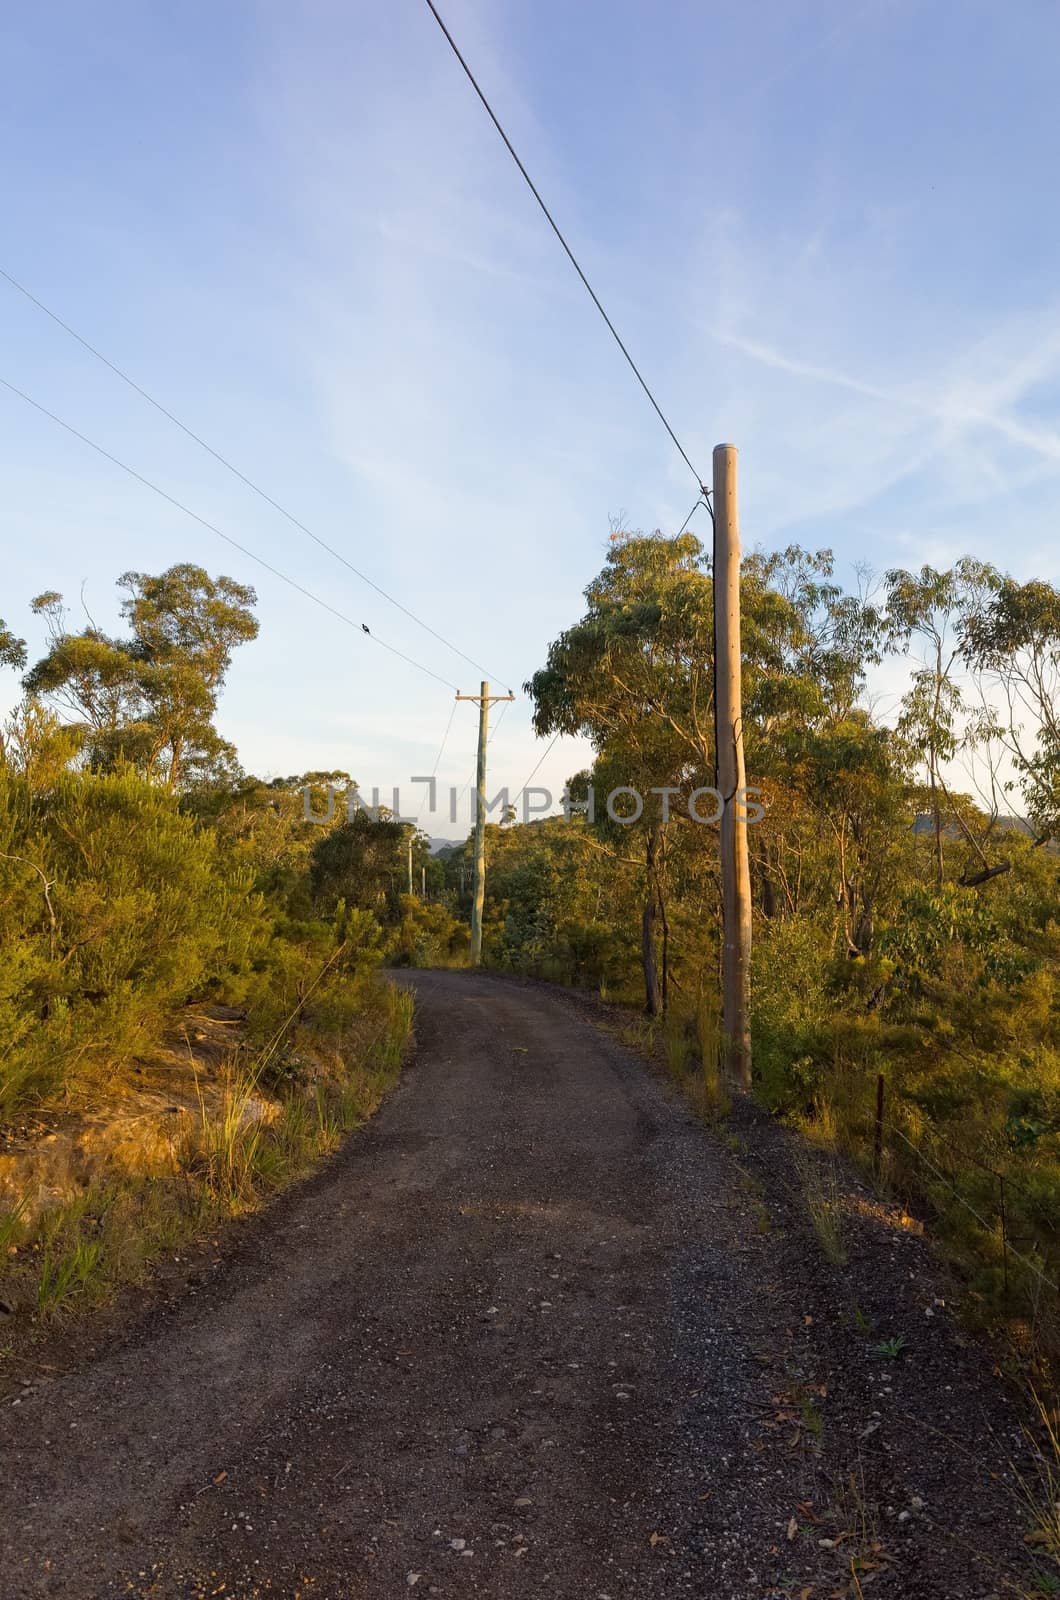 Australian Dirt Road with Electric Poles in Sunset by jaaske